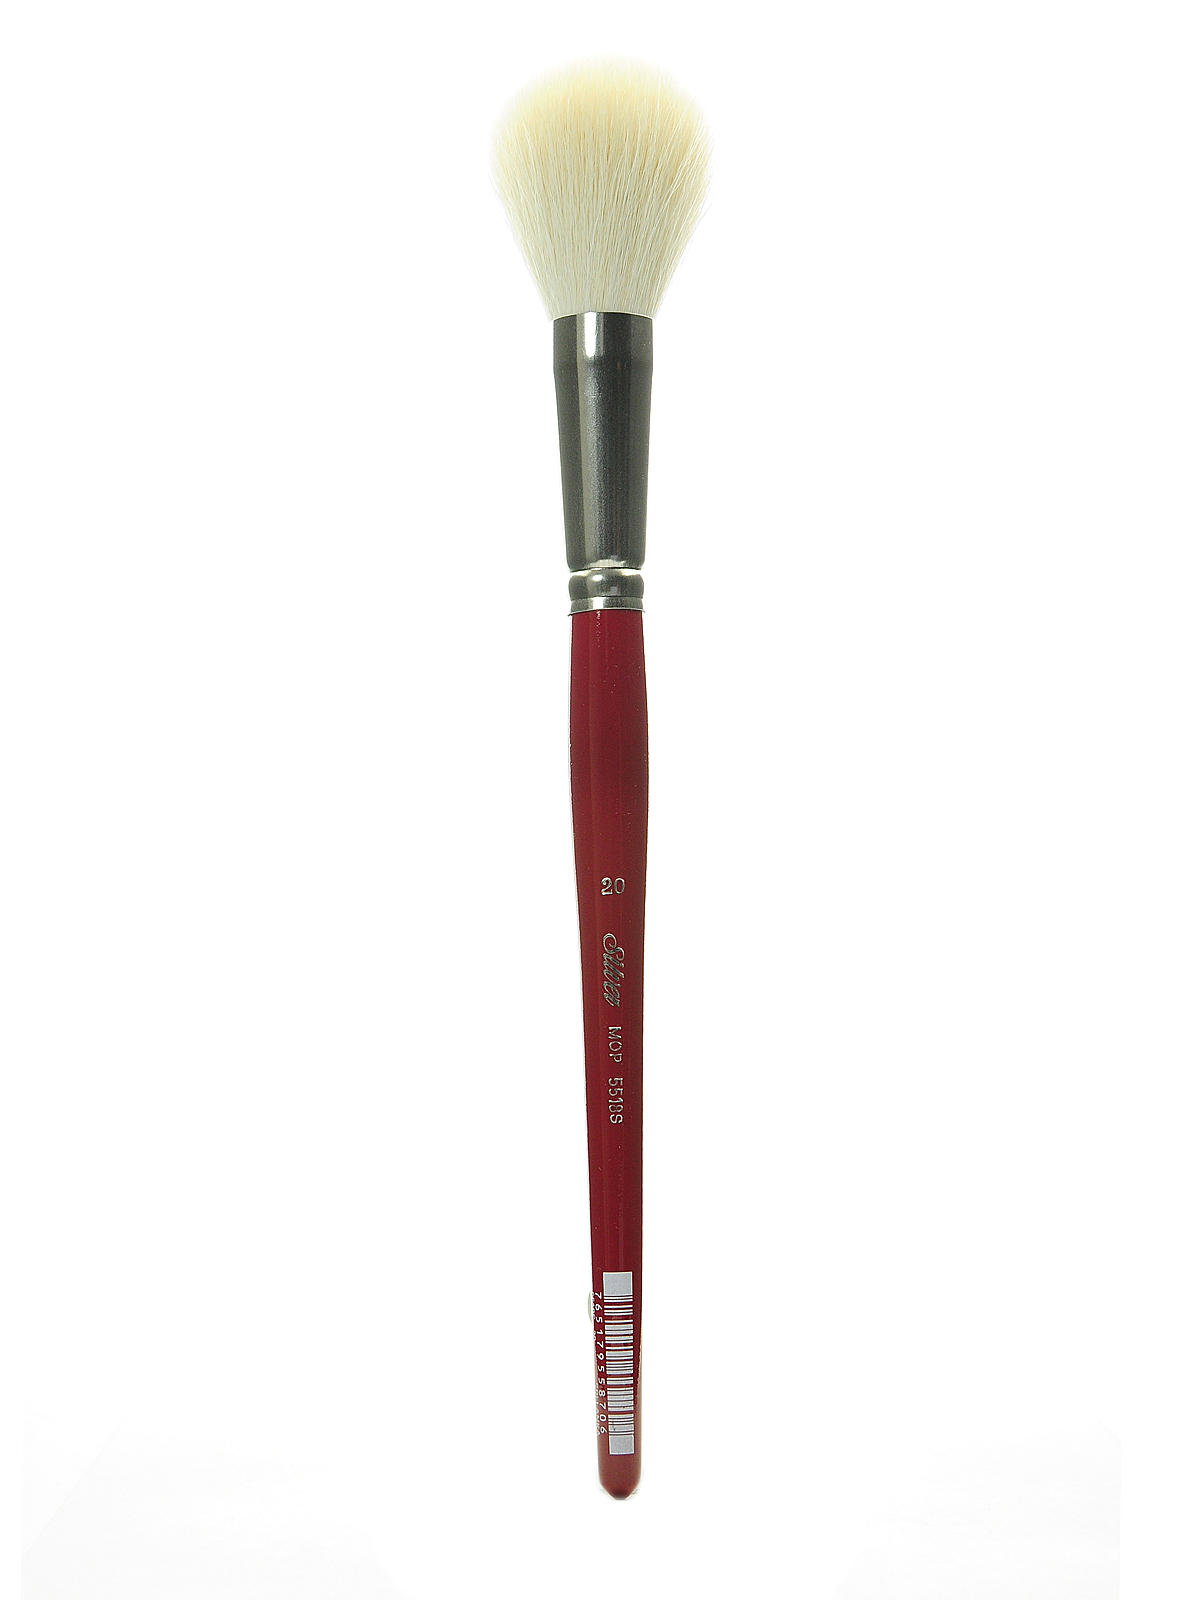 Silver Brush Limited 5518S Silver Mop White Round Paintbrush, Oil, Acrylic,  and Watercolor Brush, Short Handle, Size 20 Size - 20 White Round